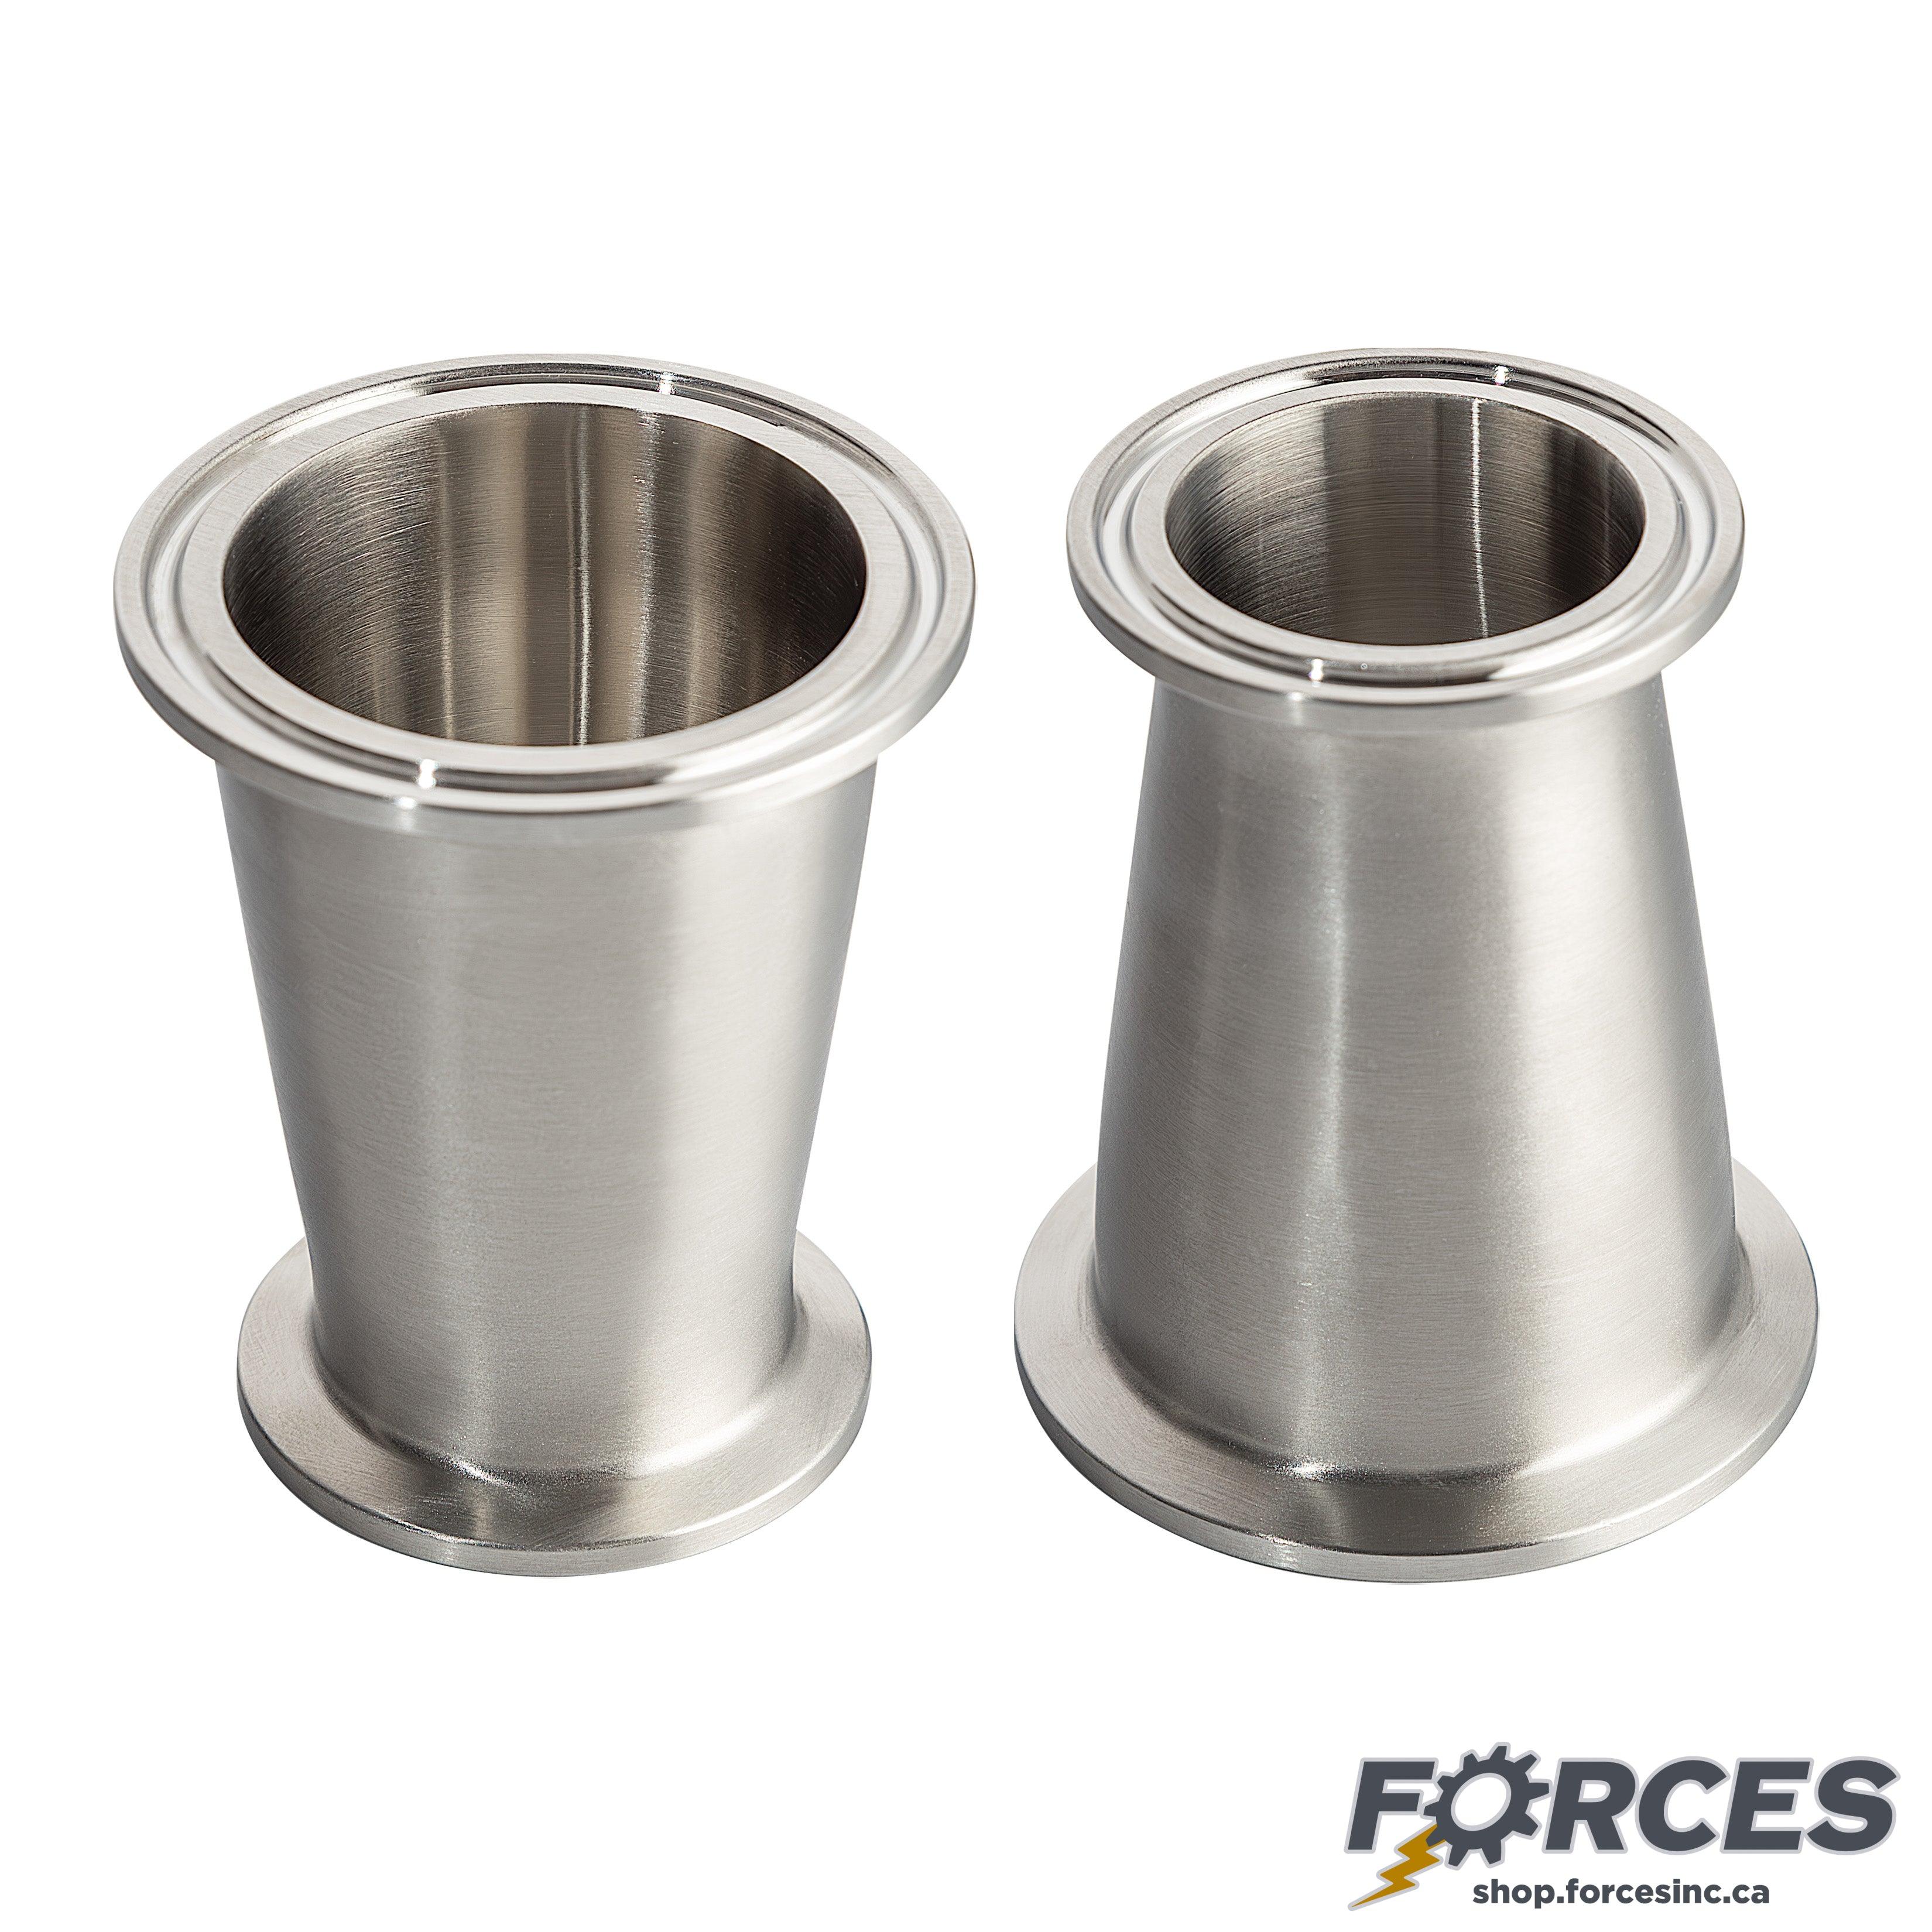 1-1/2" x 3/4" Tri-Clamp Concentric Reducer - Stainless Steel 316 - Forces Inc